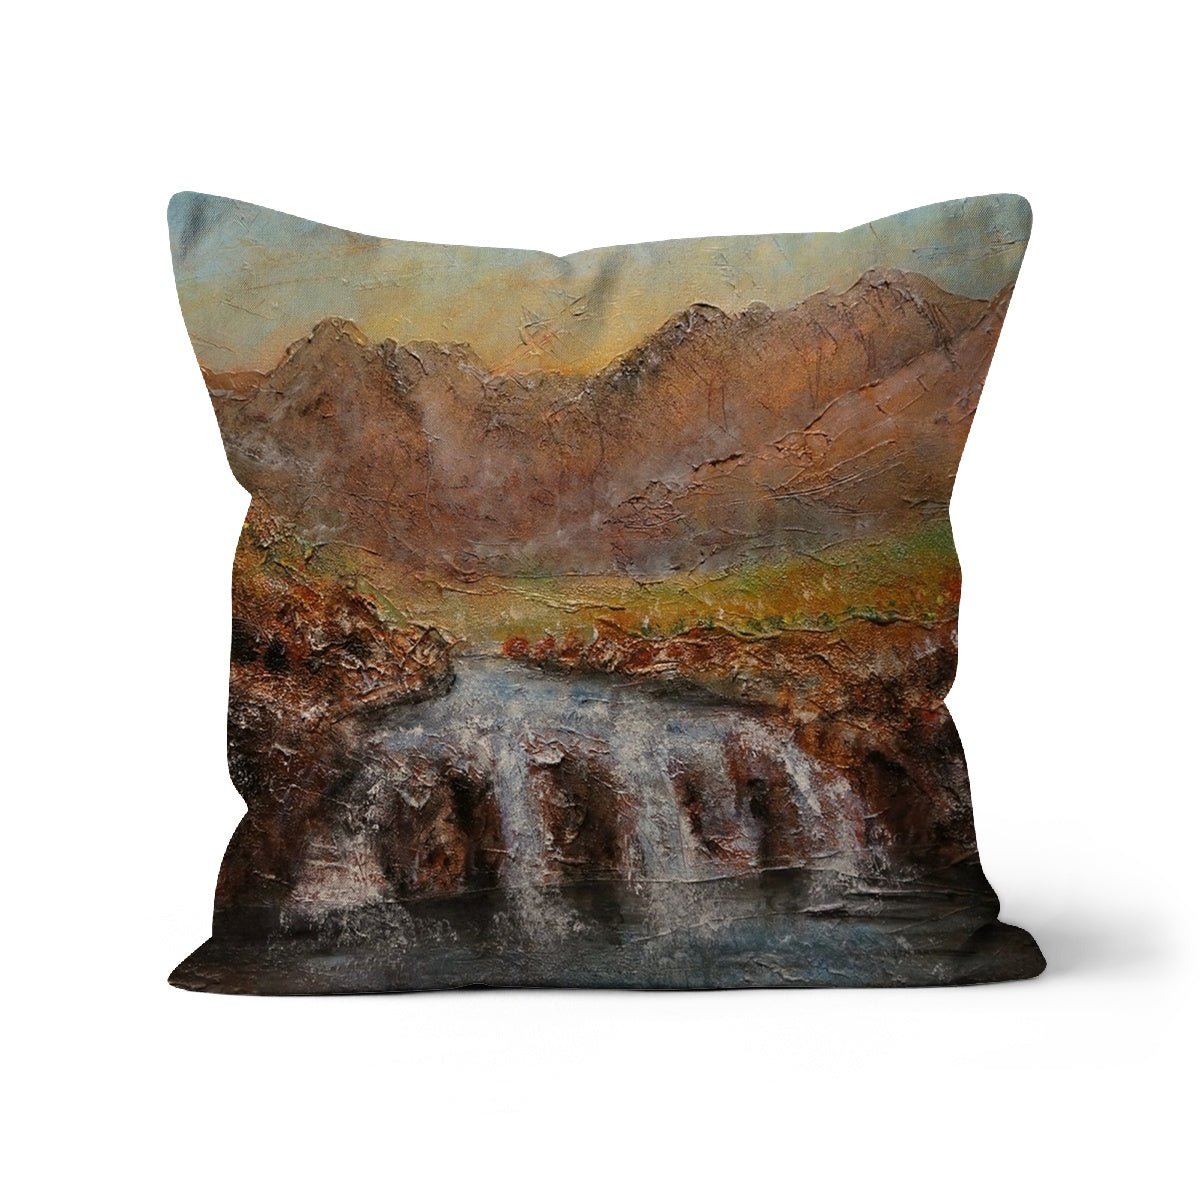 Fairy Pools Dawn Skye Art Gifts Cushion-Cushions-Skye Art Gallery-Canvas-16"x16"-Paintings, Prints, Homeware, Art Gifts From Scotland By Scottish Artist Kevin Hunter